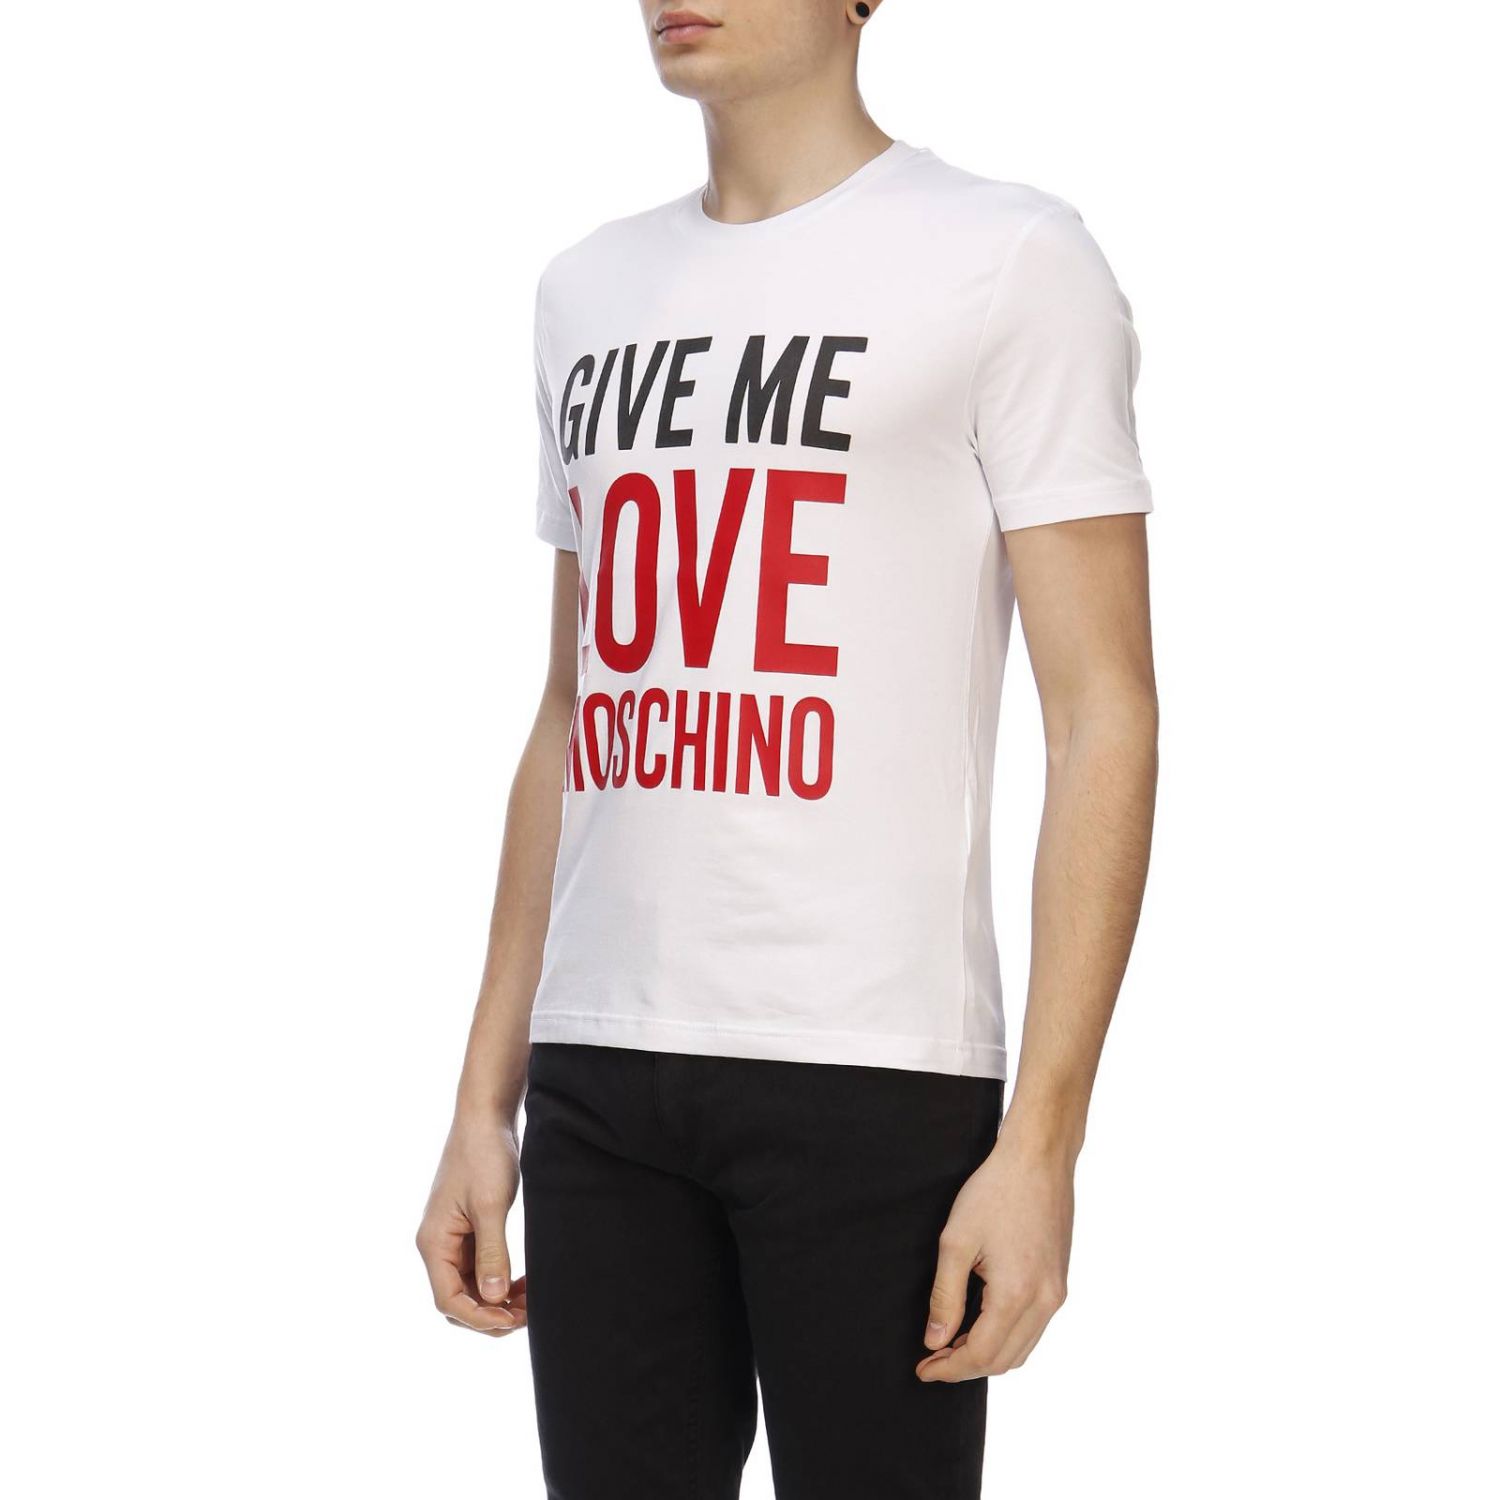 Love Moschino Outlet: t-shirt for man - White | Love Moschino t-shirt ...